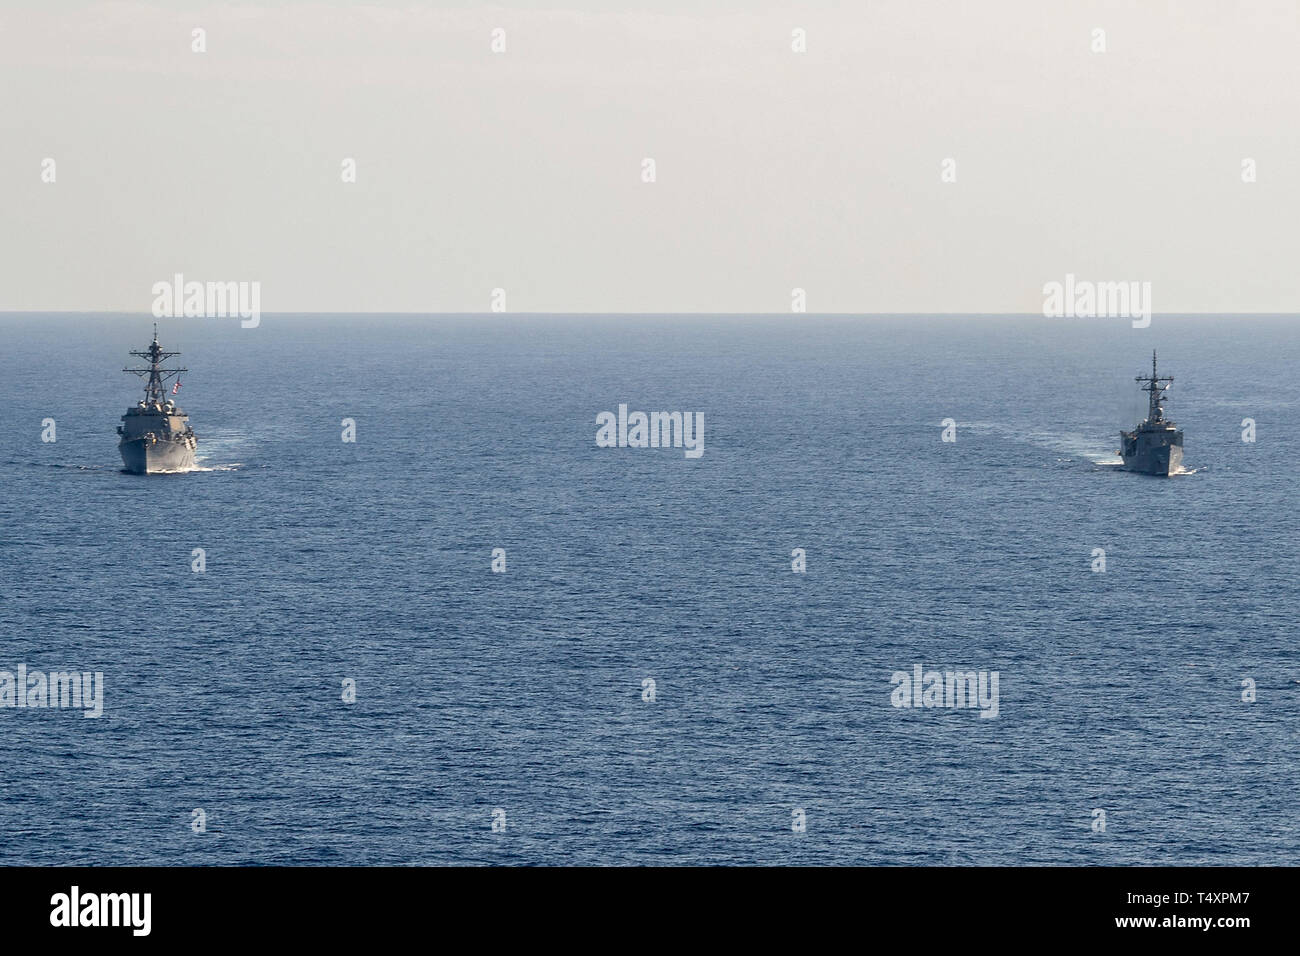 190418-N-UI104-0667    PHILIPPINE SEA (April 18, 2019) The Arleigh Burke-class guided-missile destroyer USS Preble (DDG 88) and the Royal Australian Navy Adelaide-class guided-missile frigate HMAS Melbourne (FFG 05) transit in formation during a cooperative deployment. Preble and Melbourne are participating in a cooperative deployment in order to improve on maritime capabilities between partners.  Preble is deployed to the U.S 7th Fleet area of operations in support of security and stability in the Indo-Pacific region. (U.S. Navy photo by Mass Communication Specialist 1st Class Bryan Niegel/Re Stock Photo